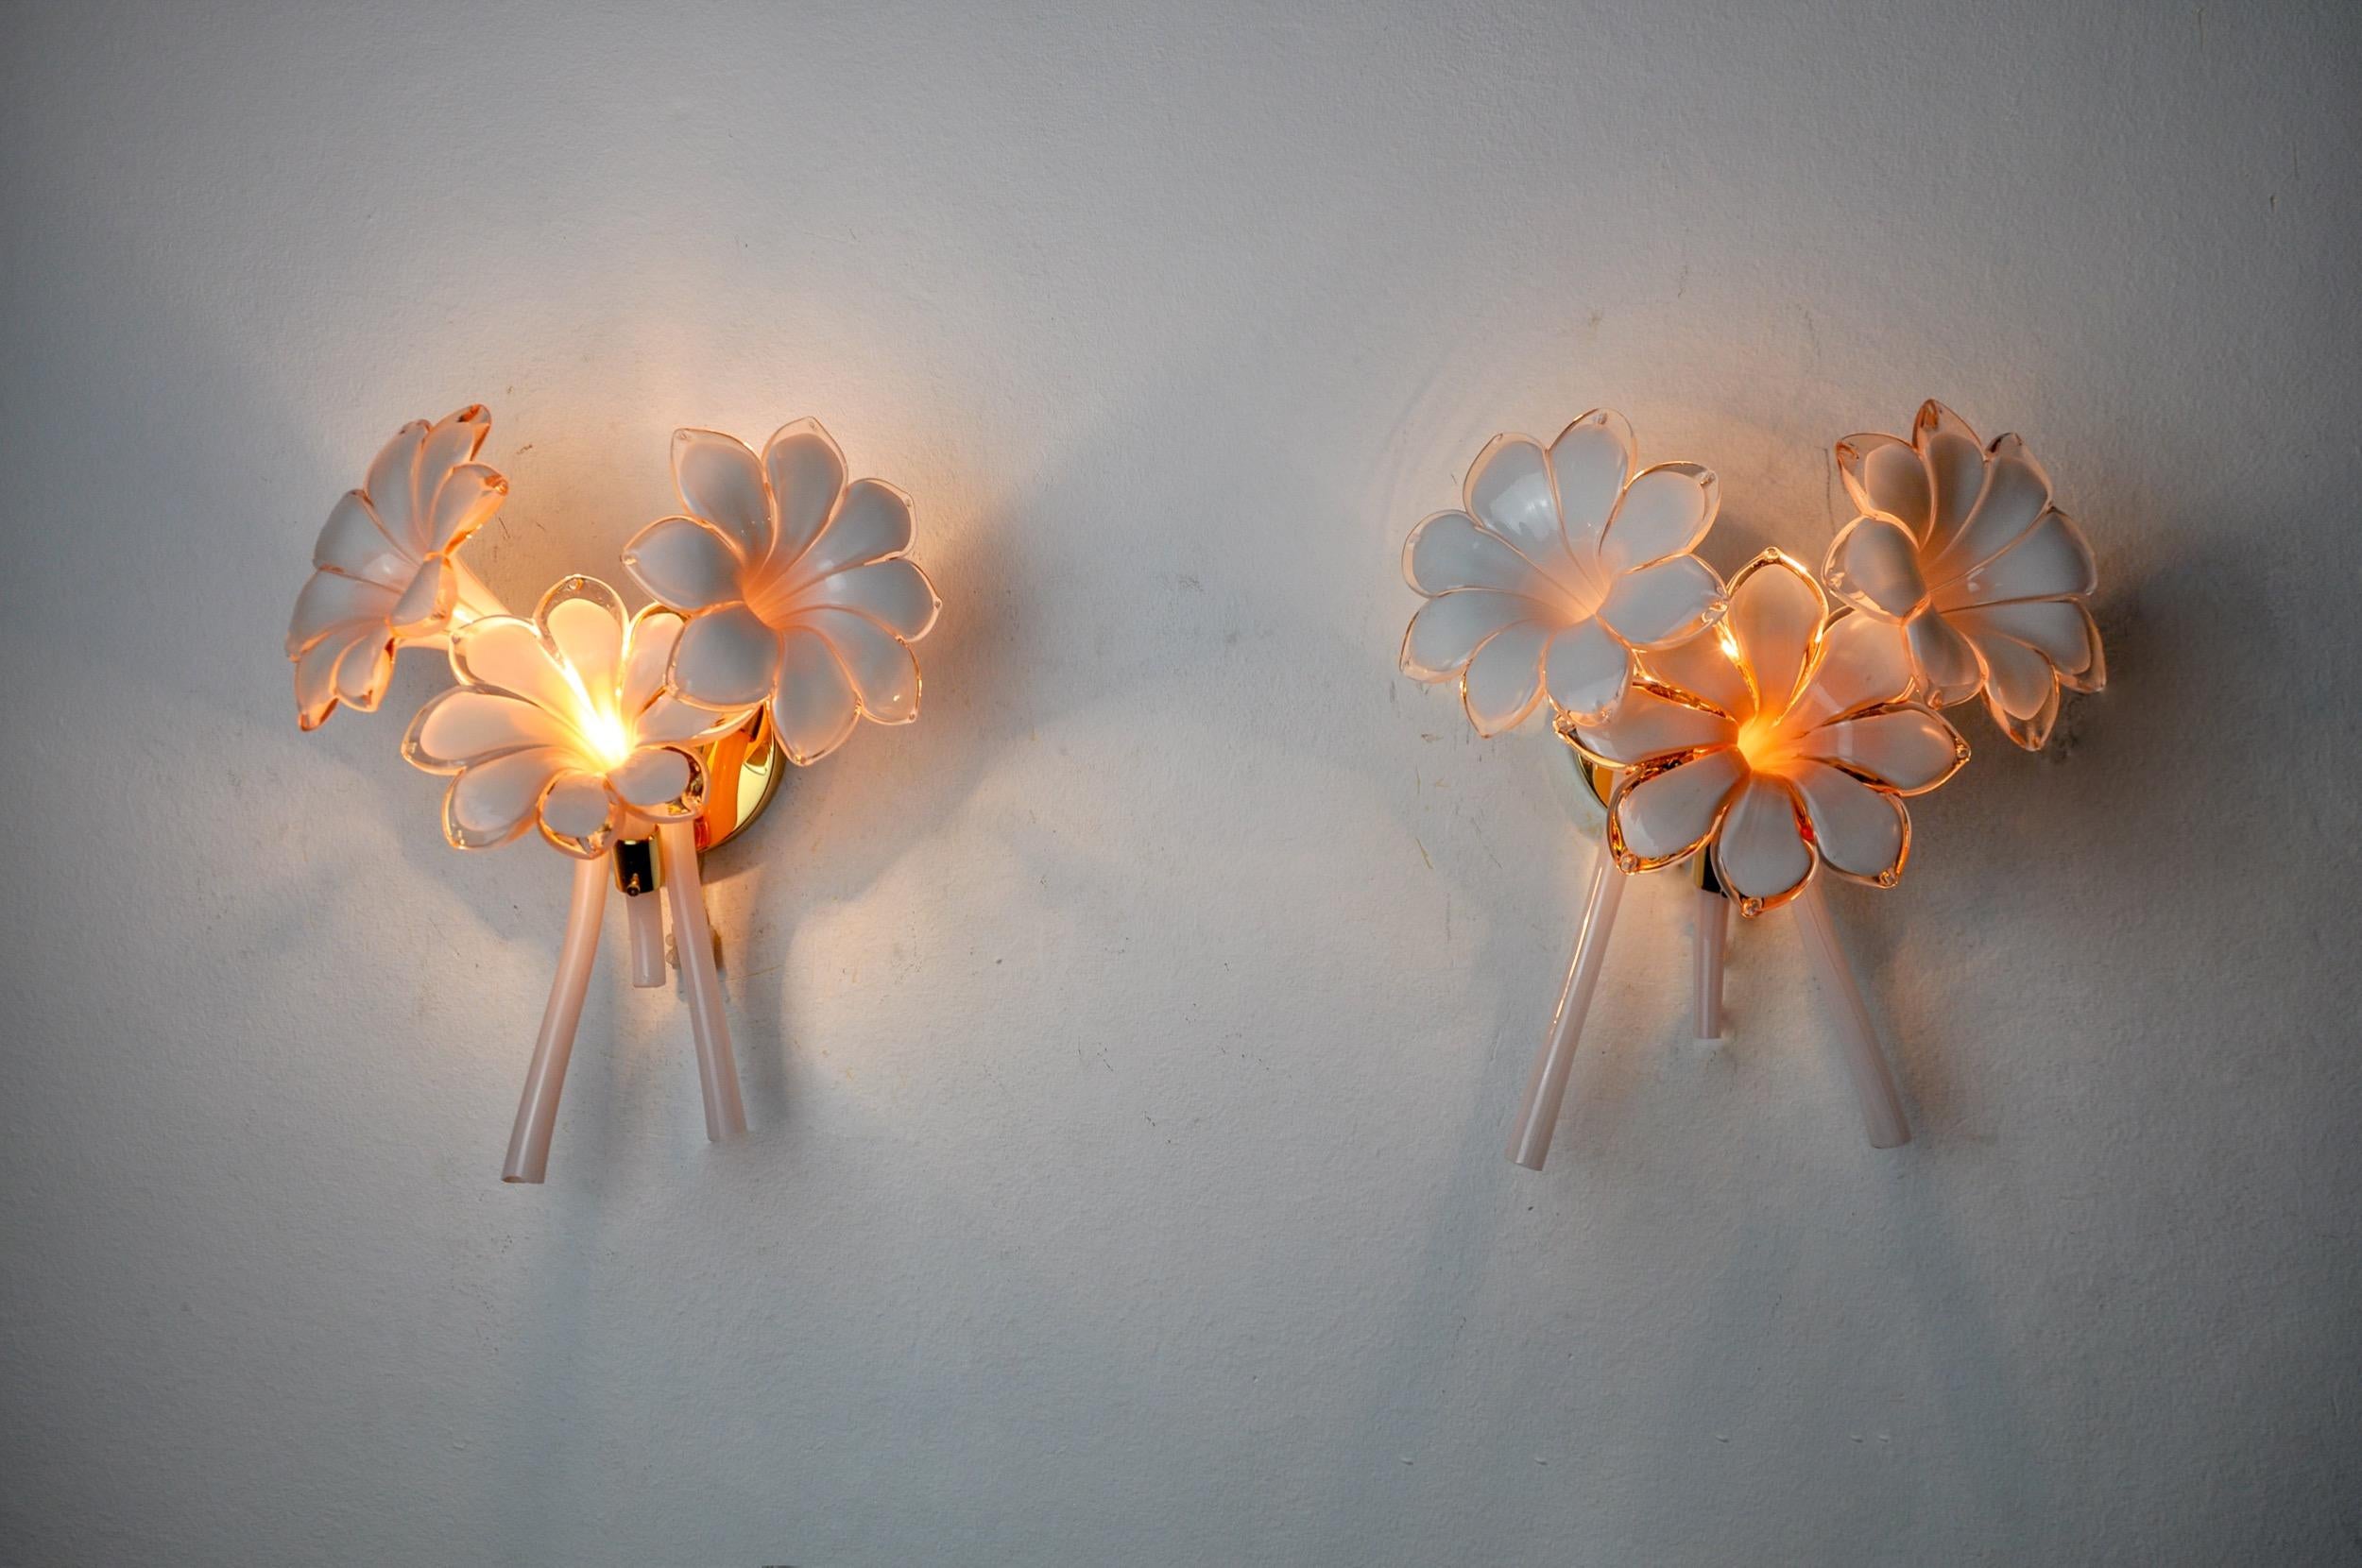 Superb and rare pair of fleur de lys wall lamps in murano glass, designed and produced in italy in the 1970s. Gilded metal structure composed of pink cut crystals in the shape of a fleur-de-lys, made by italian master glassmakers. Rare design object